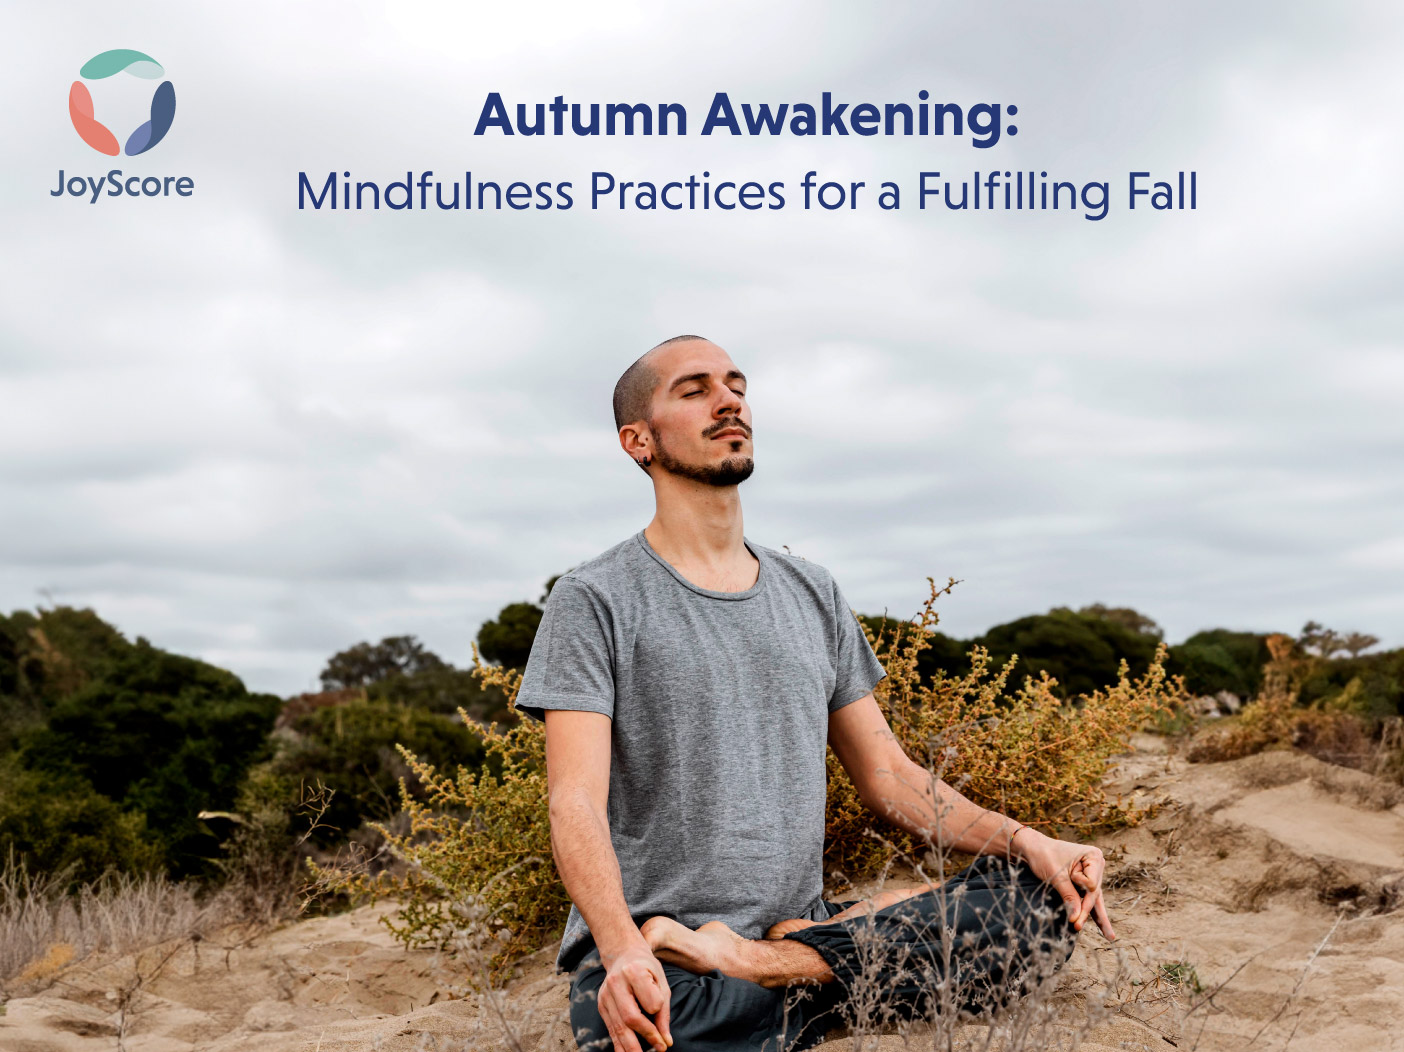 Autumn Awakening: Mindfulness Practices for a Fulfilling Fall